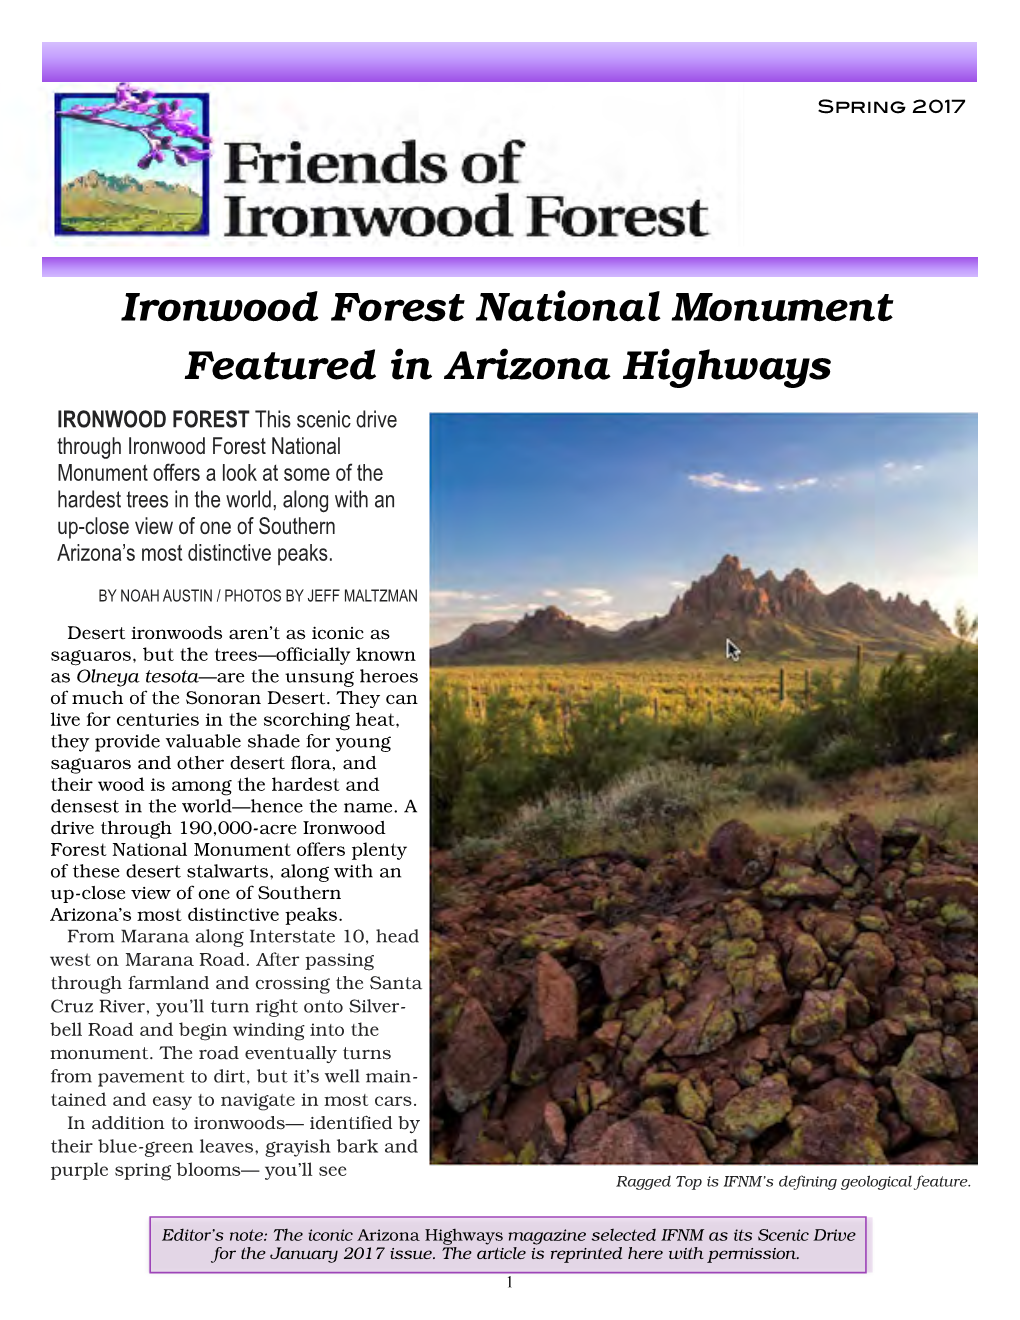 Friends of Ironwood Forest, Spring 2017